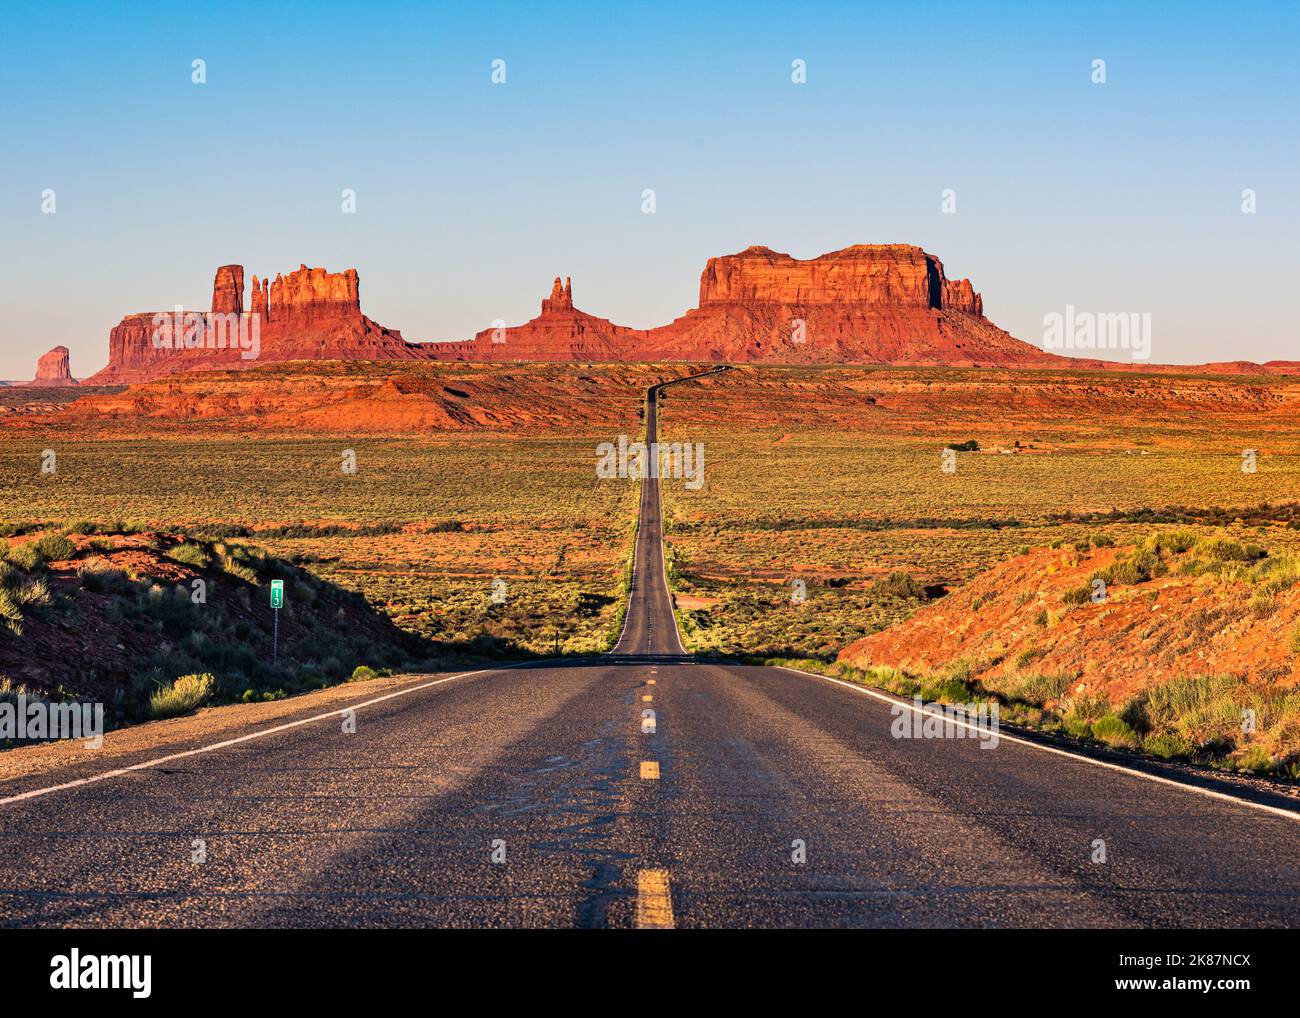 Classic sunrise view of Monument Valley and highway 163 at milepost 13. Stock Photo